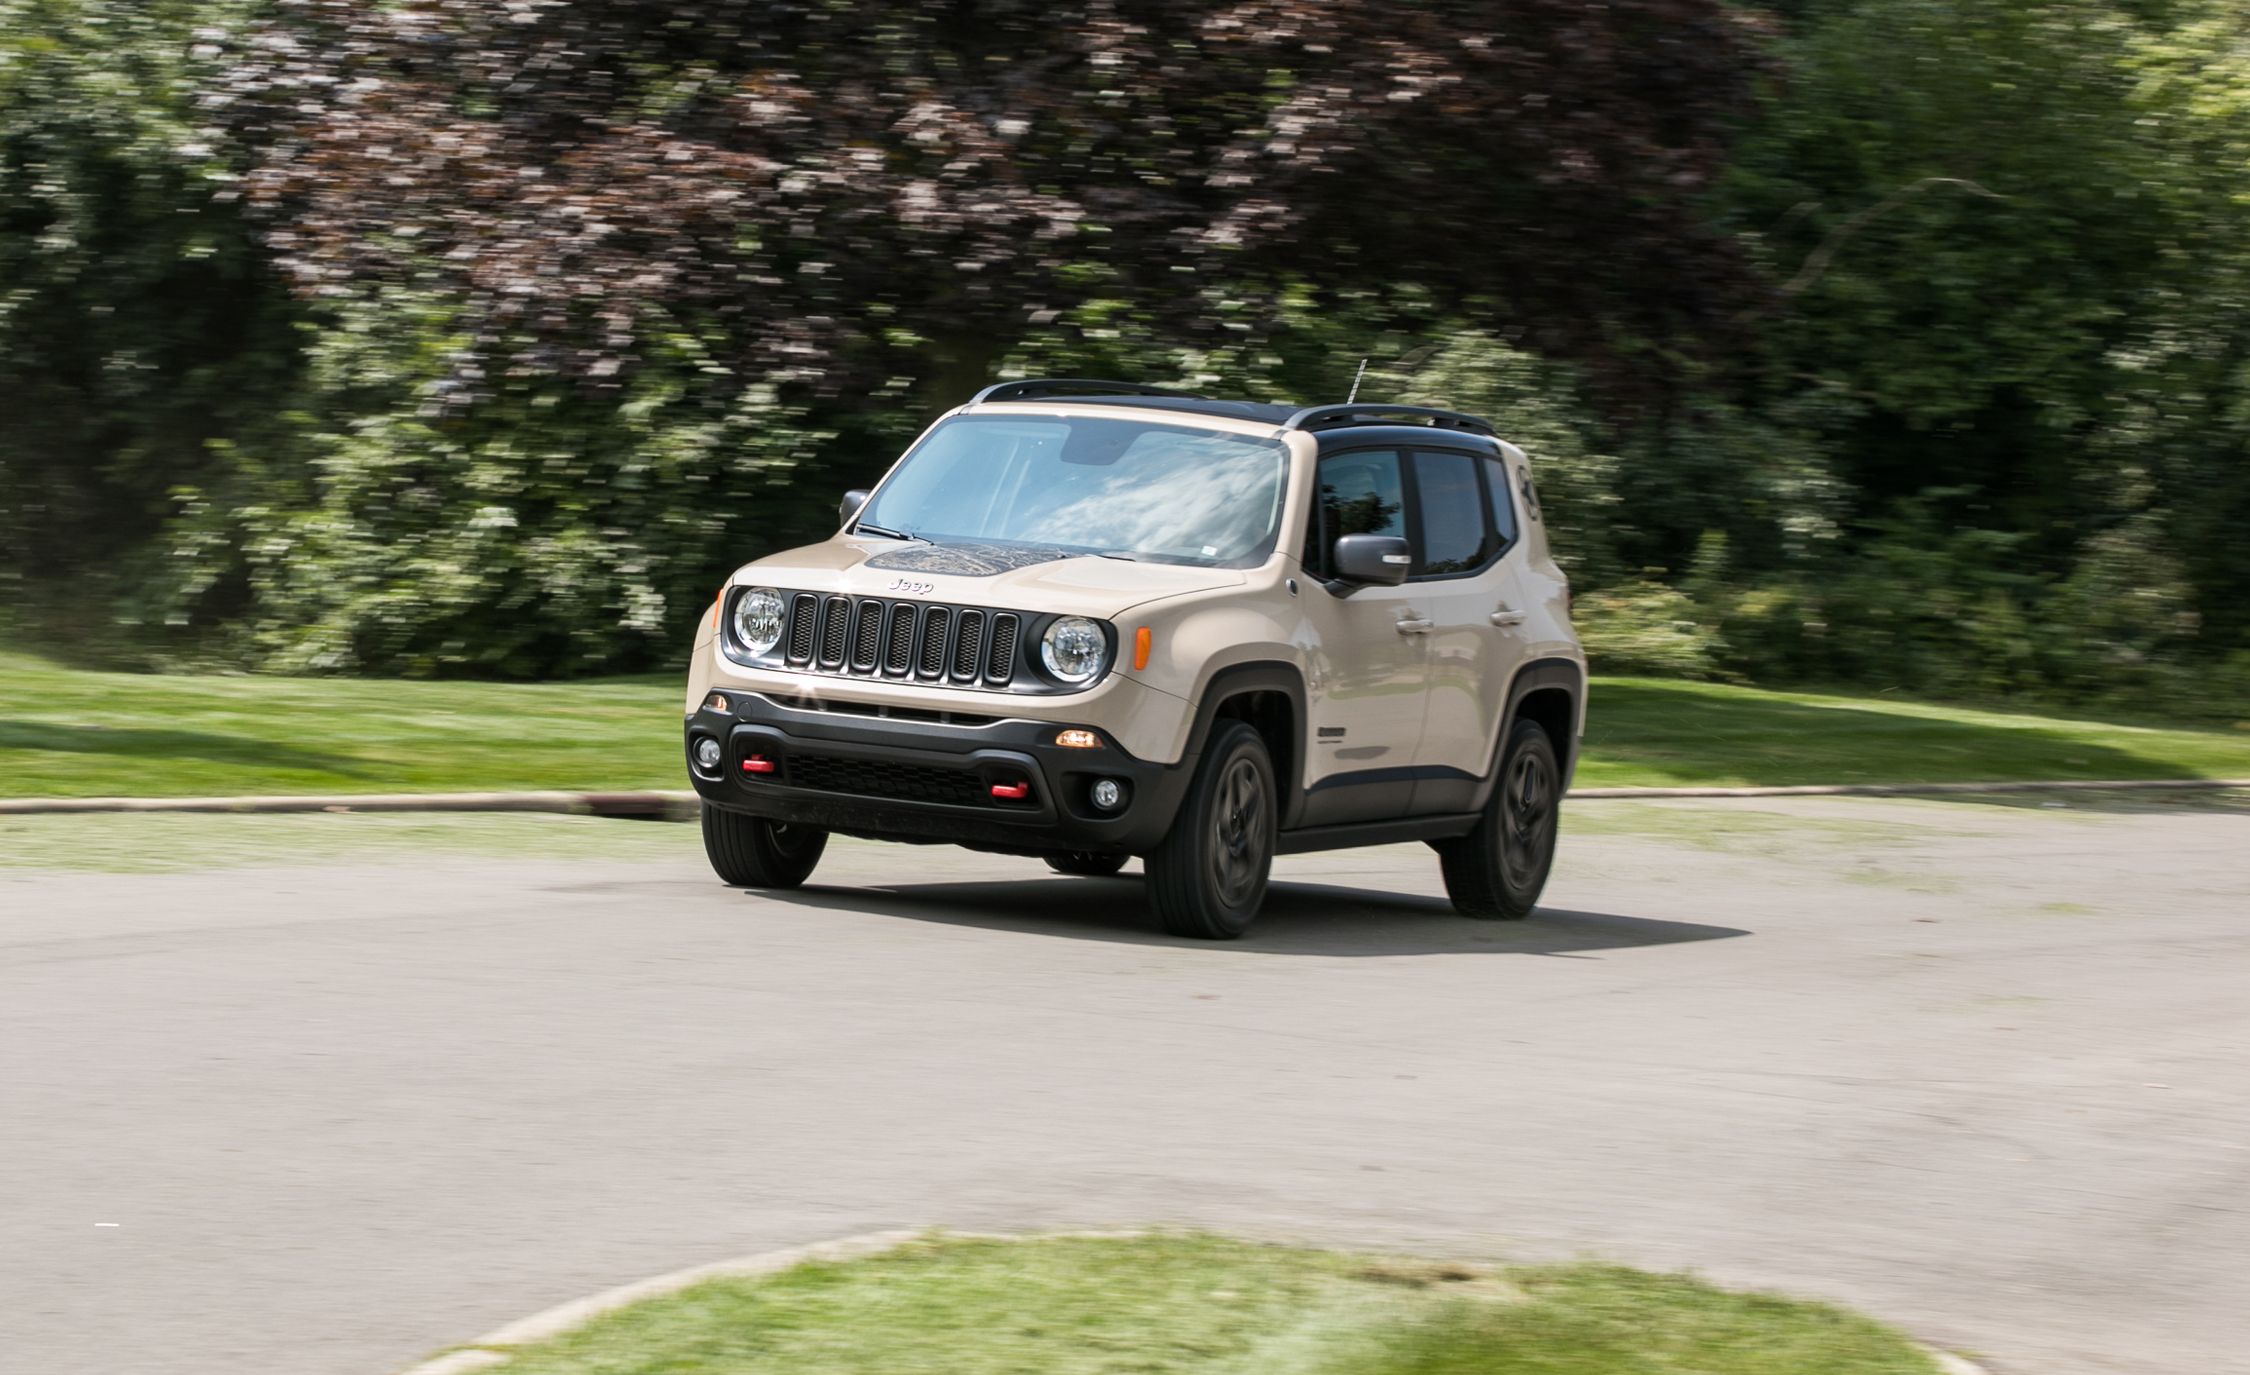 2018 Jeep Renegade Prices, Reviews, and Photos - MotorTrend